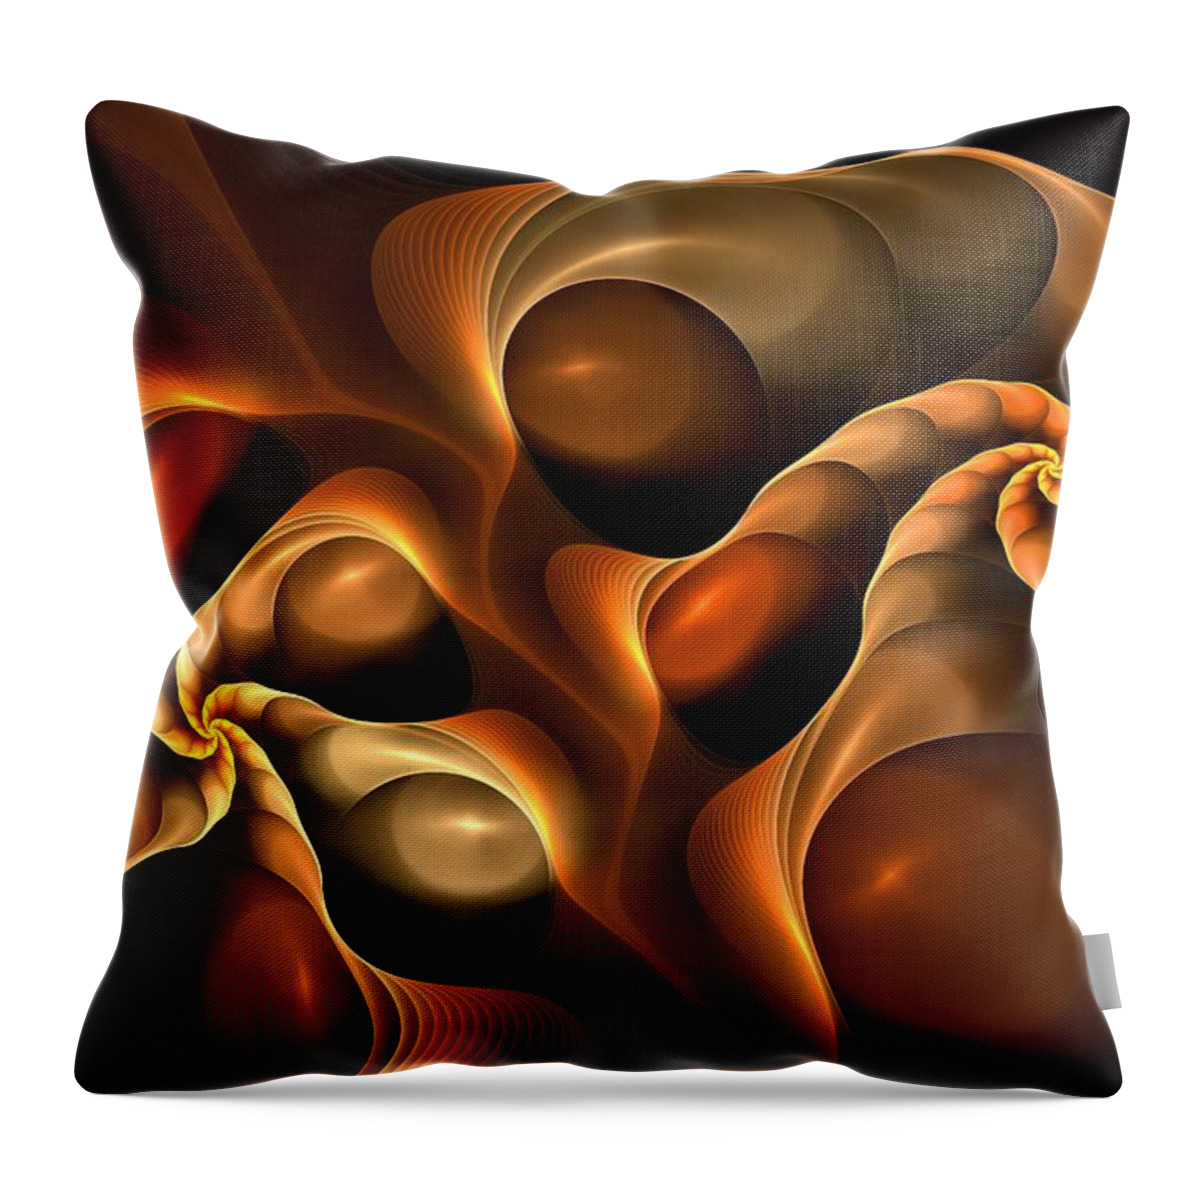 Candy Series Throw Pillow featuring the digital art Candied Caramel Twists by Doug Morgan